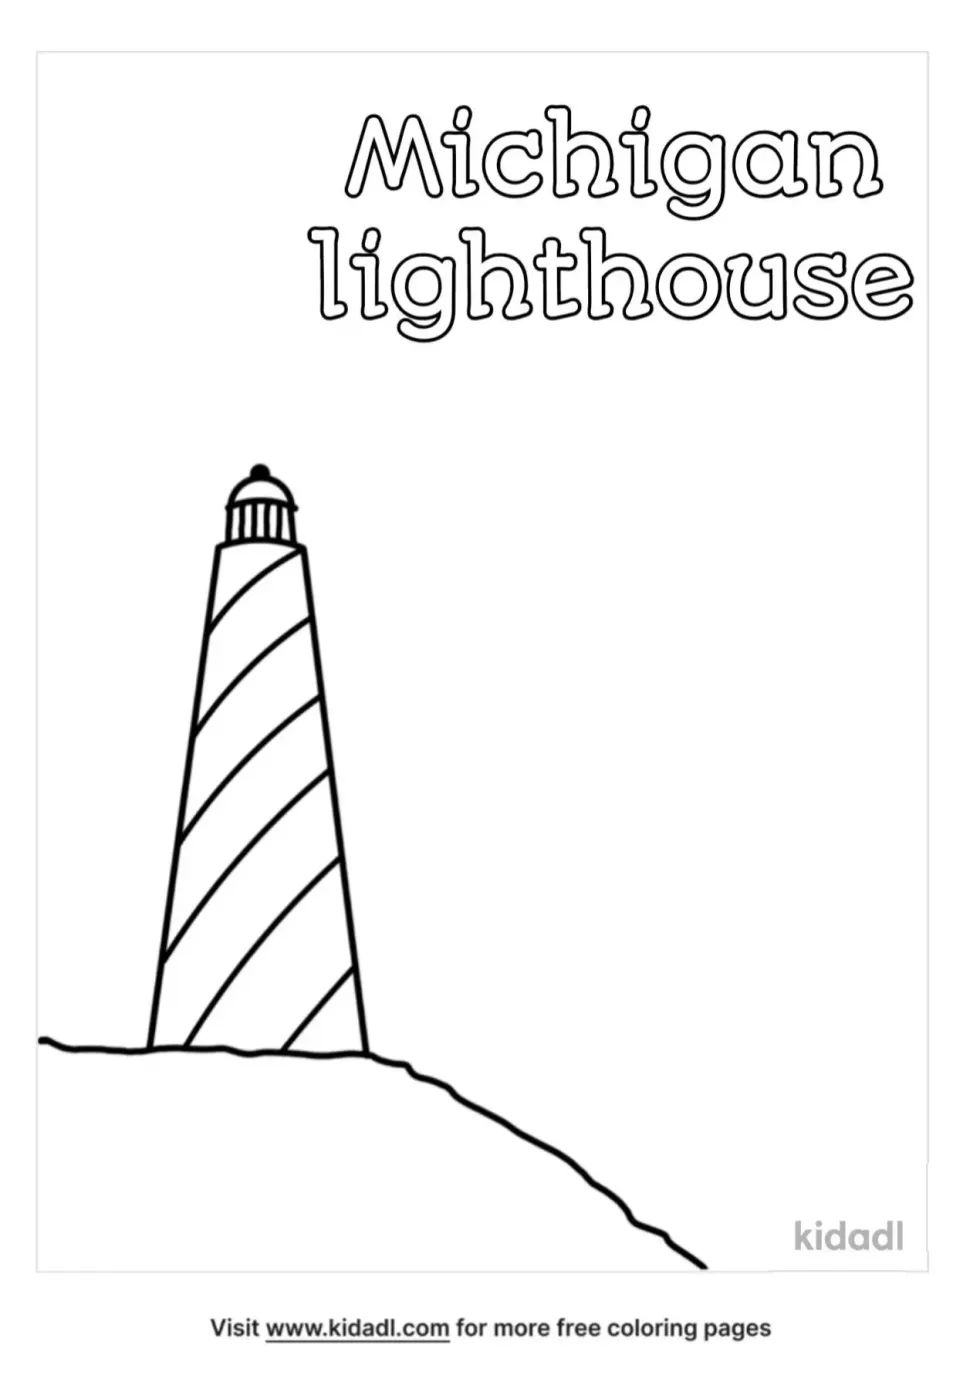 Michigan Lighthouse Coloring Page